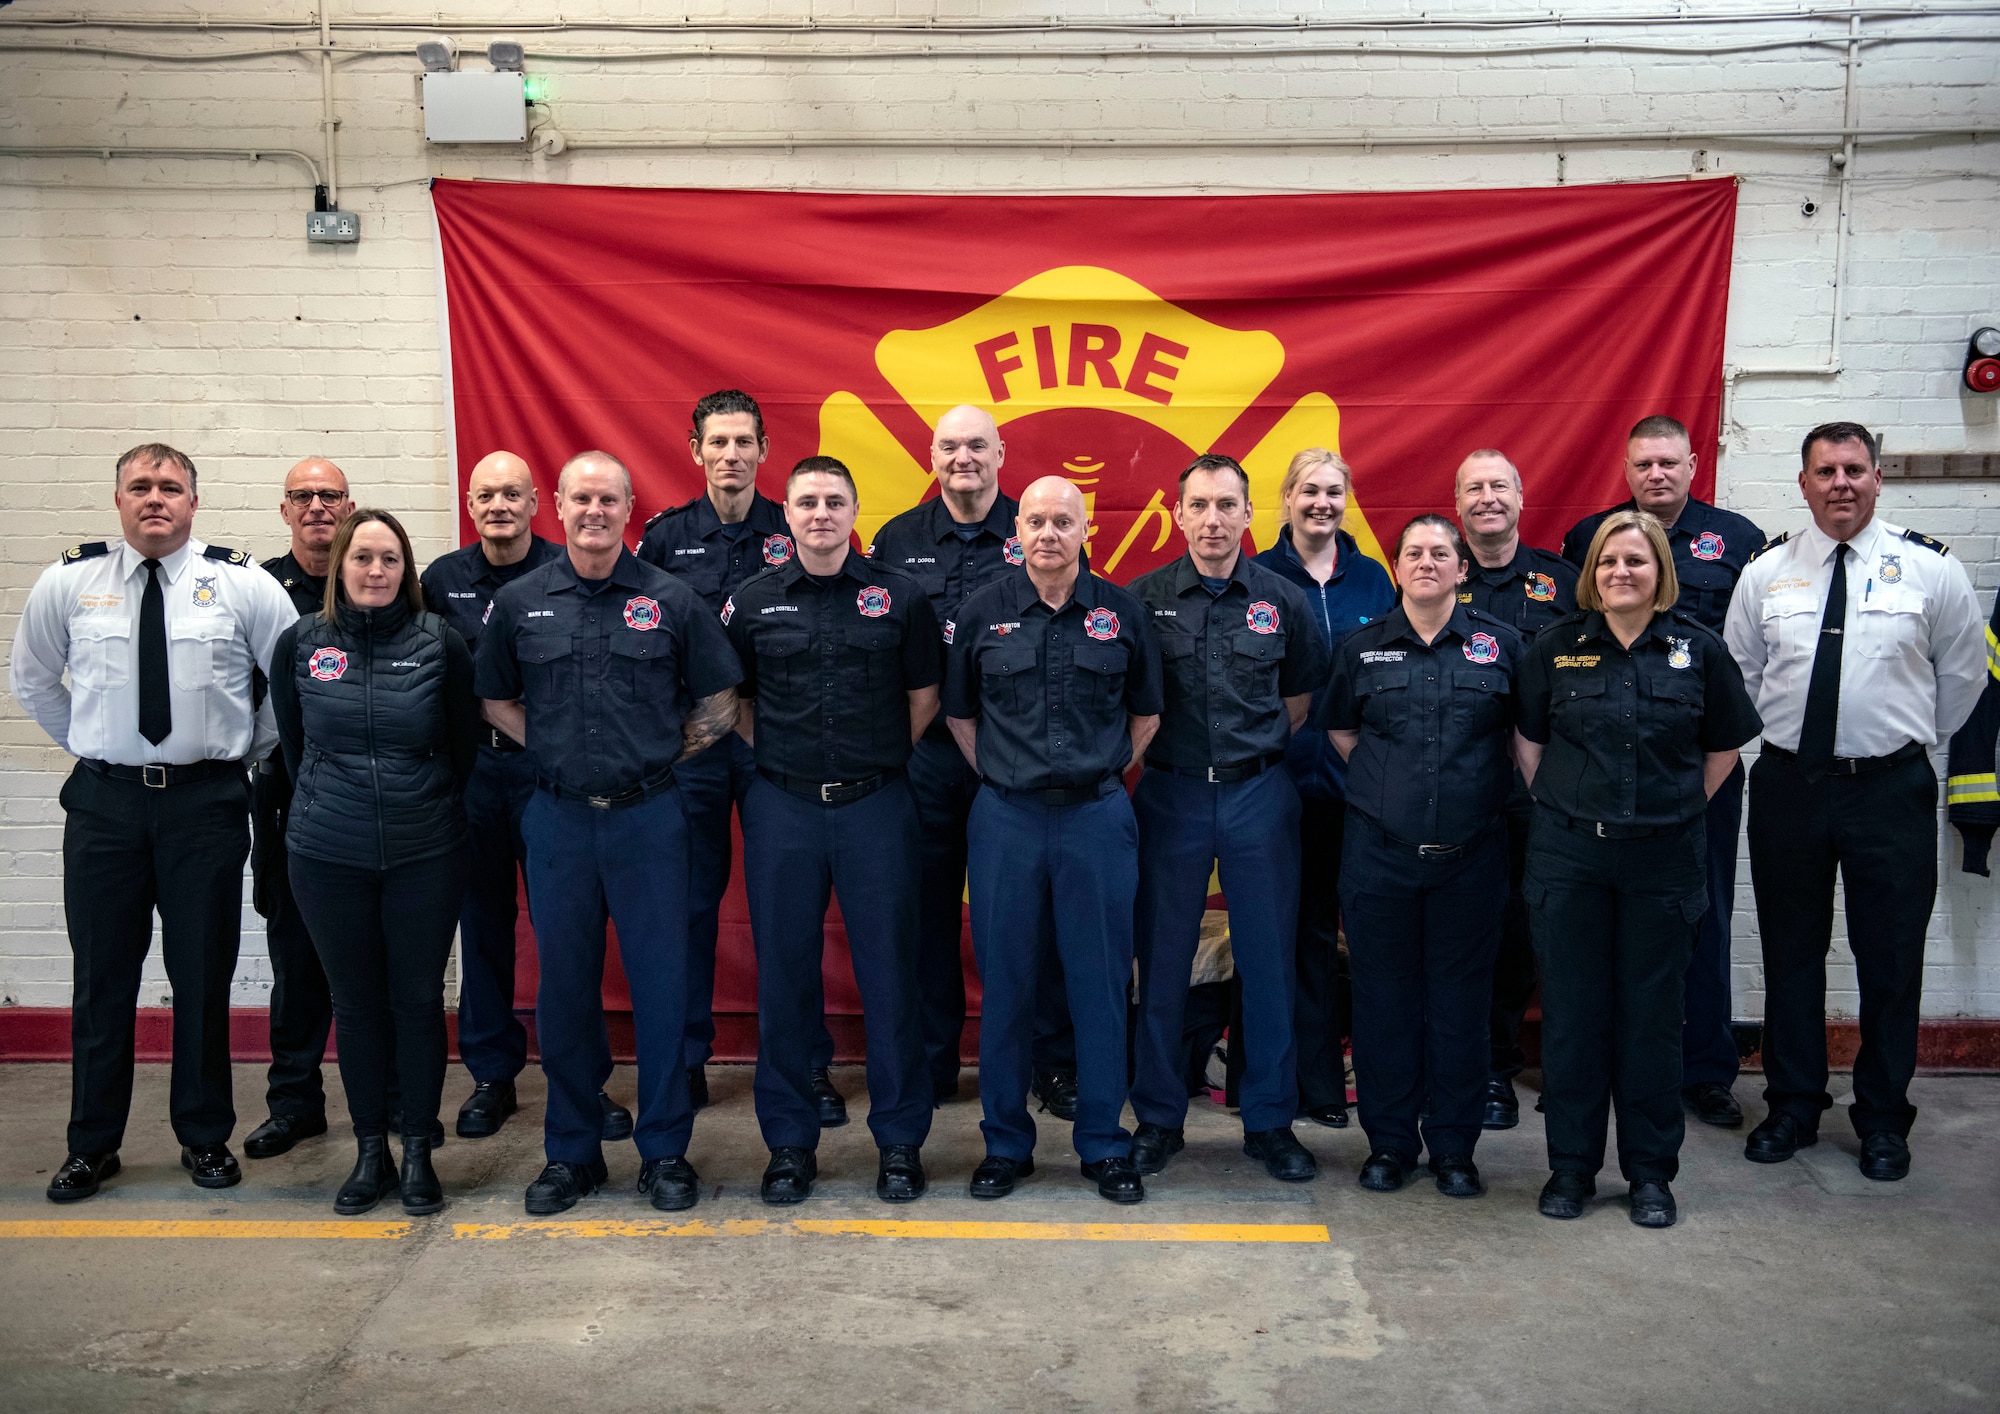 Members of RAF Menwith Hill’s fire department pose for a photo at RAF Menwith Hill, England, Jan. 30, 2023. This department had just won the USAFE small fire department of the year and fire prevention program of the year. (U.S. Air Force photo by Senior Airman Jason W. Cochran)